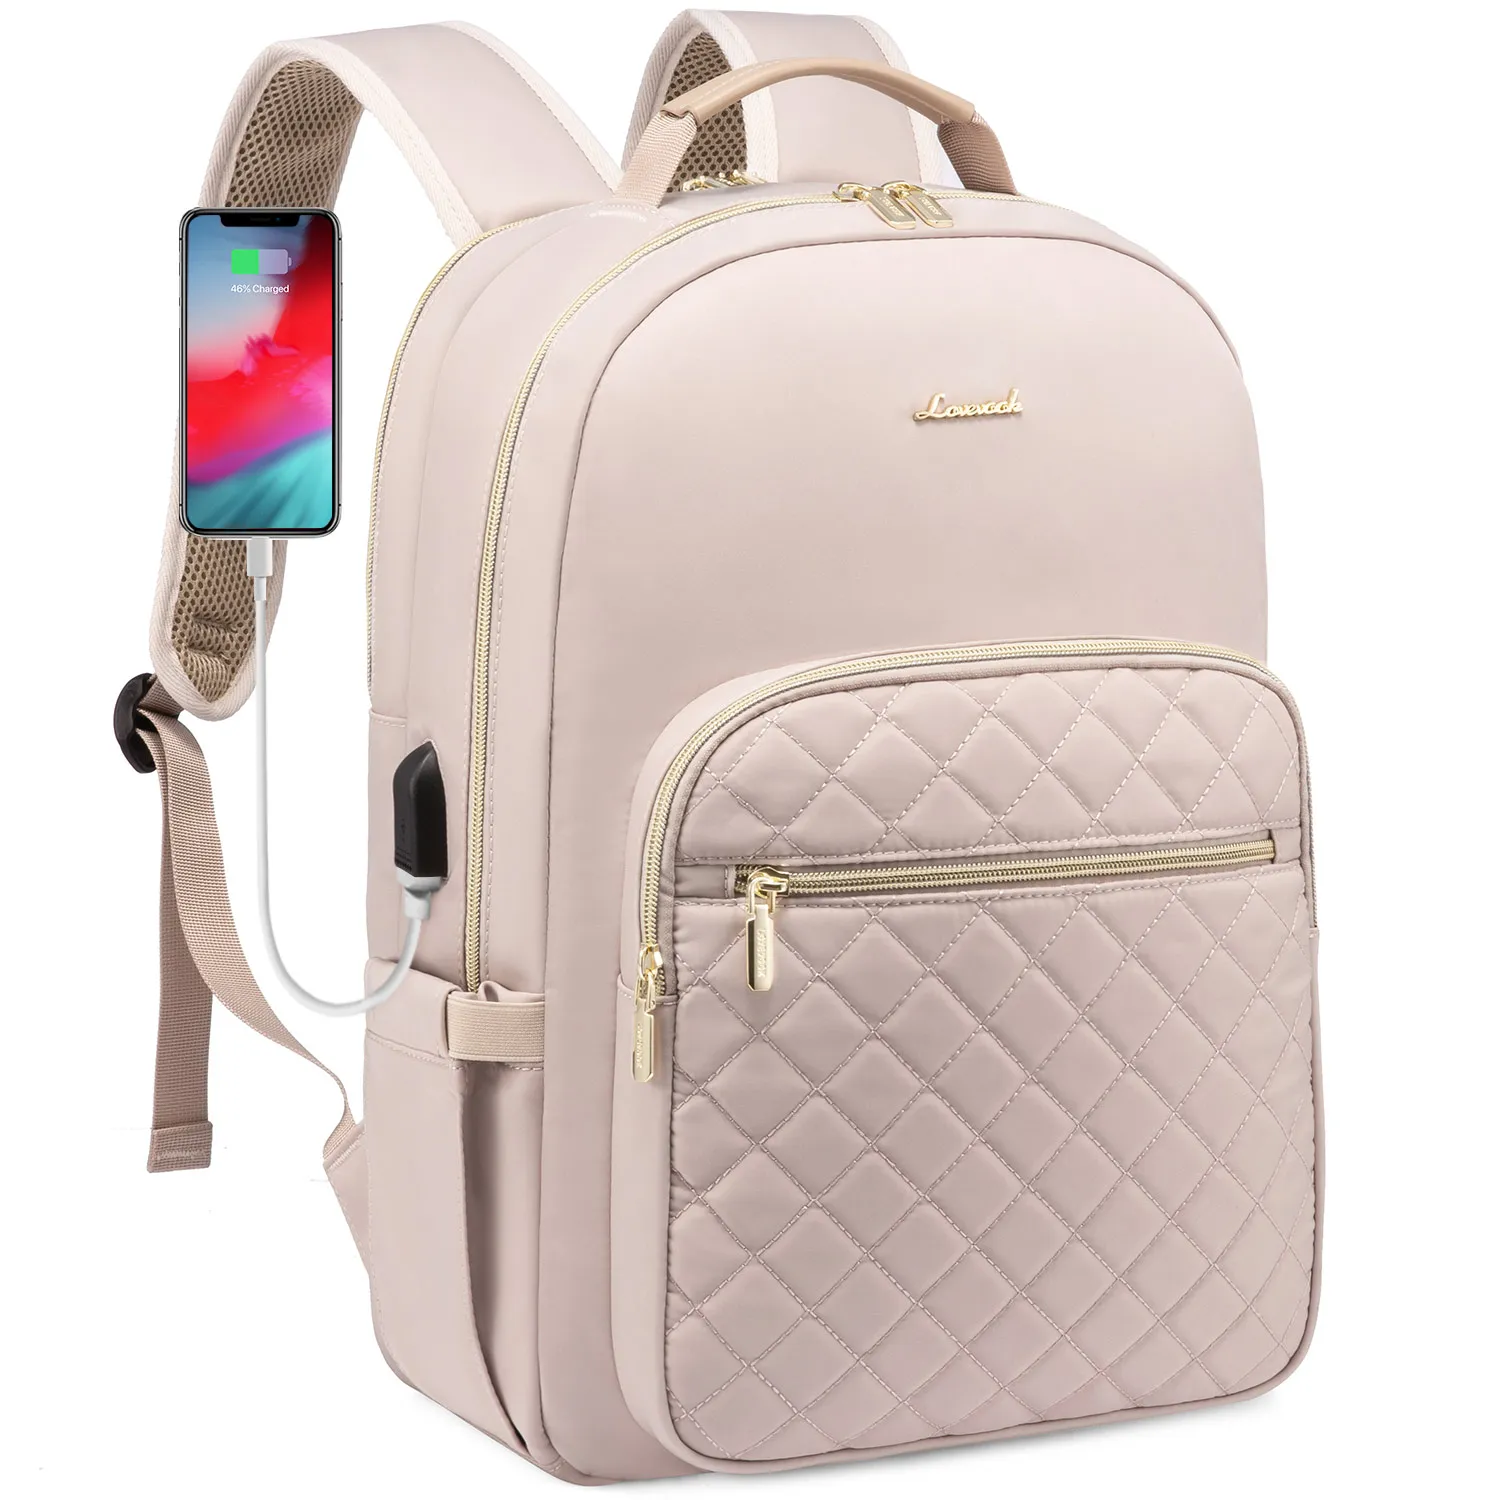 

LOVEVOOK Stylish Quilted 15.6 inch Laptop Backpacks Purse Business Work Travel College Bookbag with USB Cute Backpack for Women